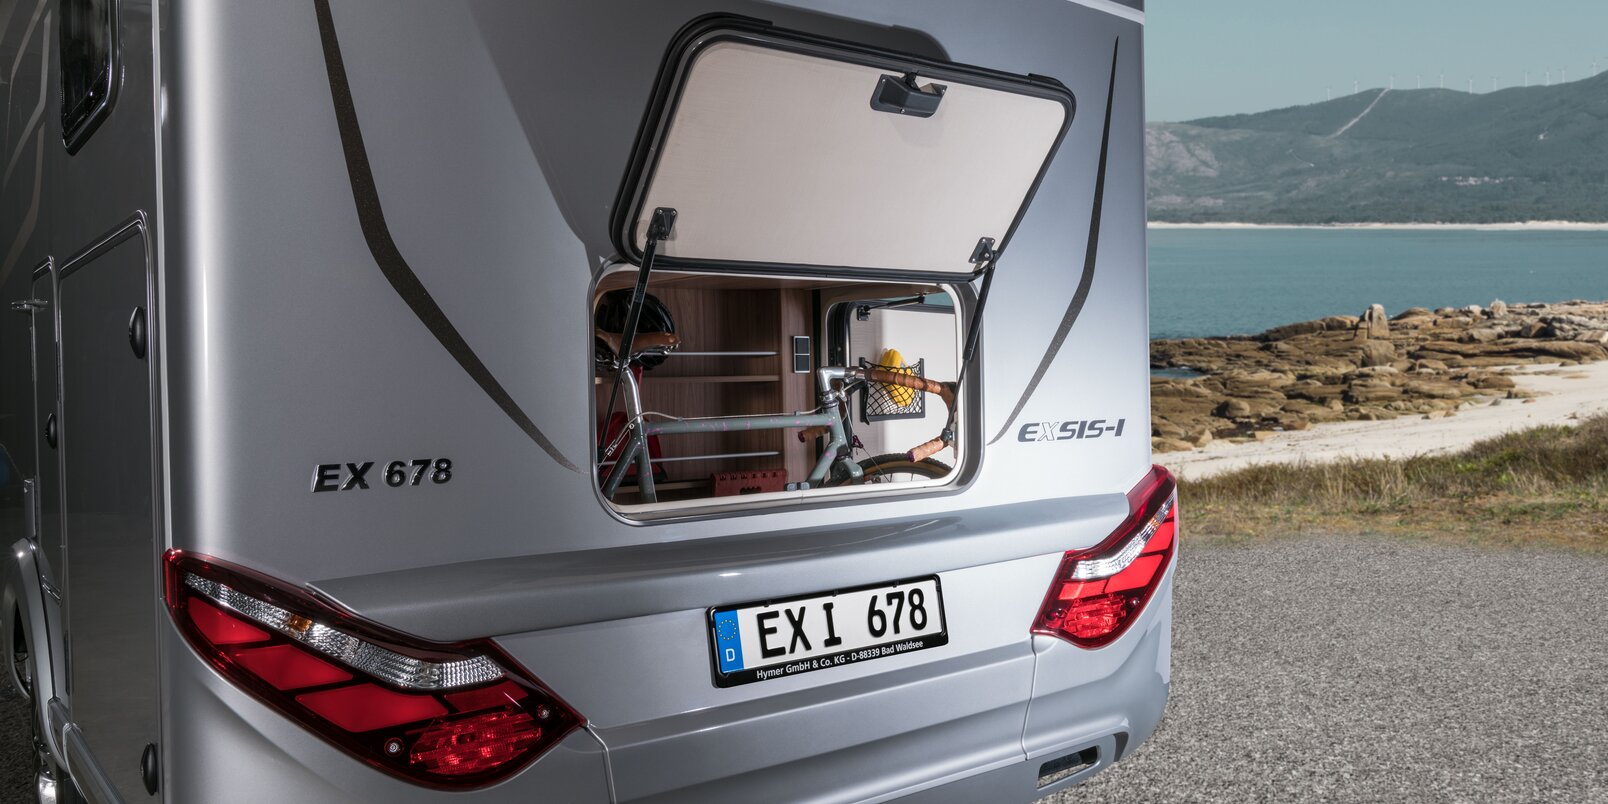 Open garage flap in the rear wall of the HYMER Exsis motorhome